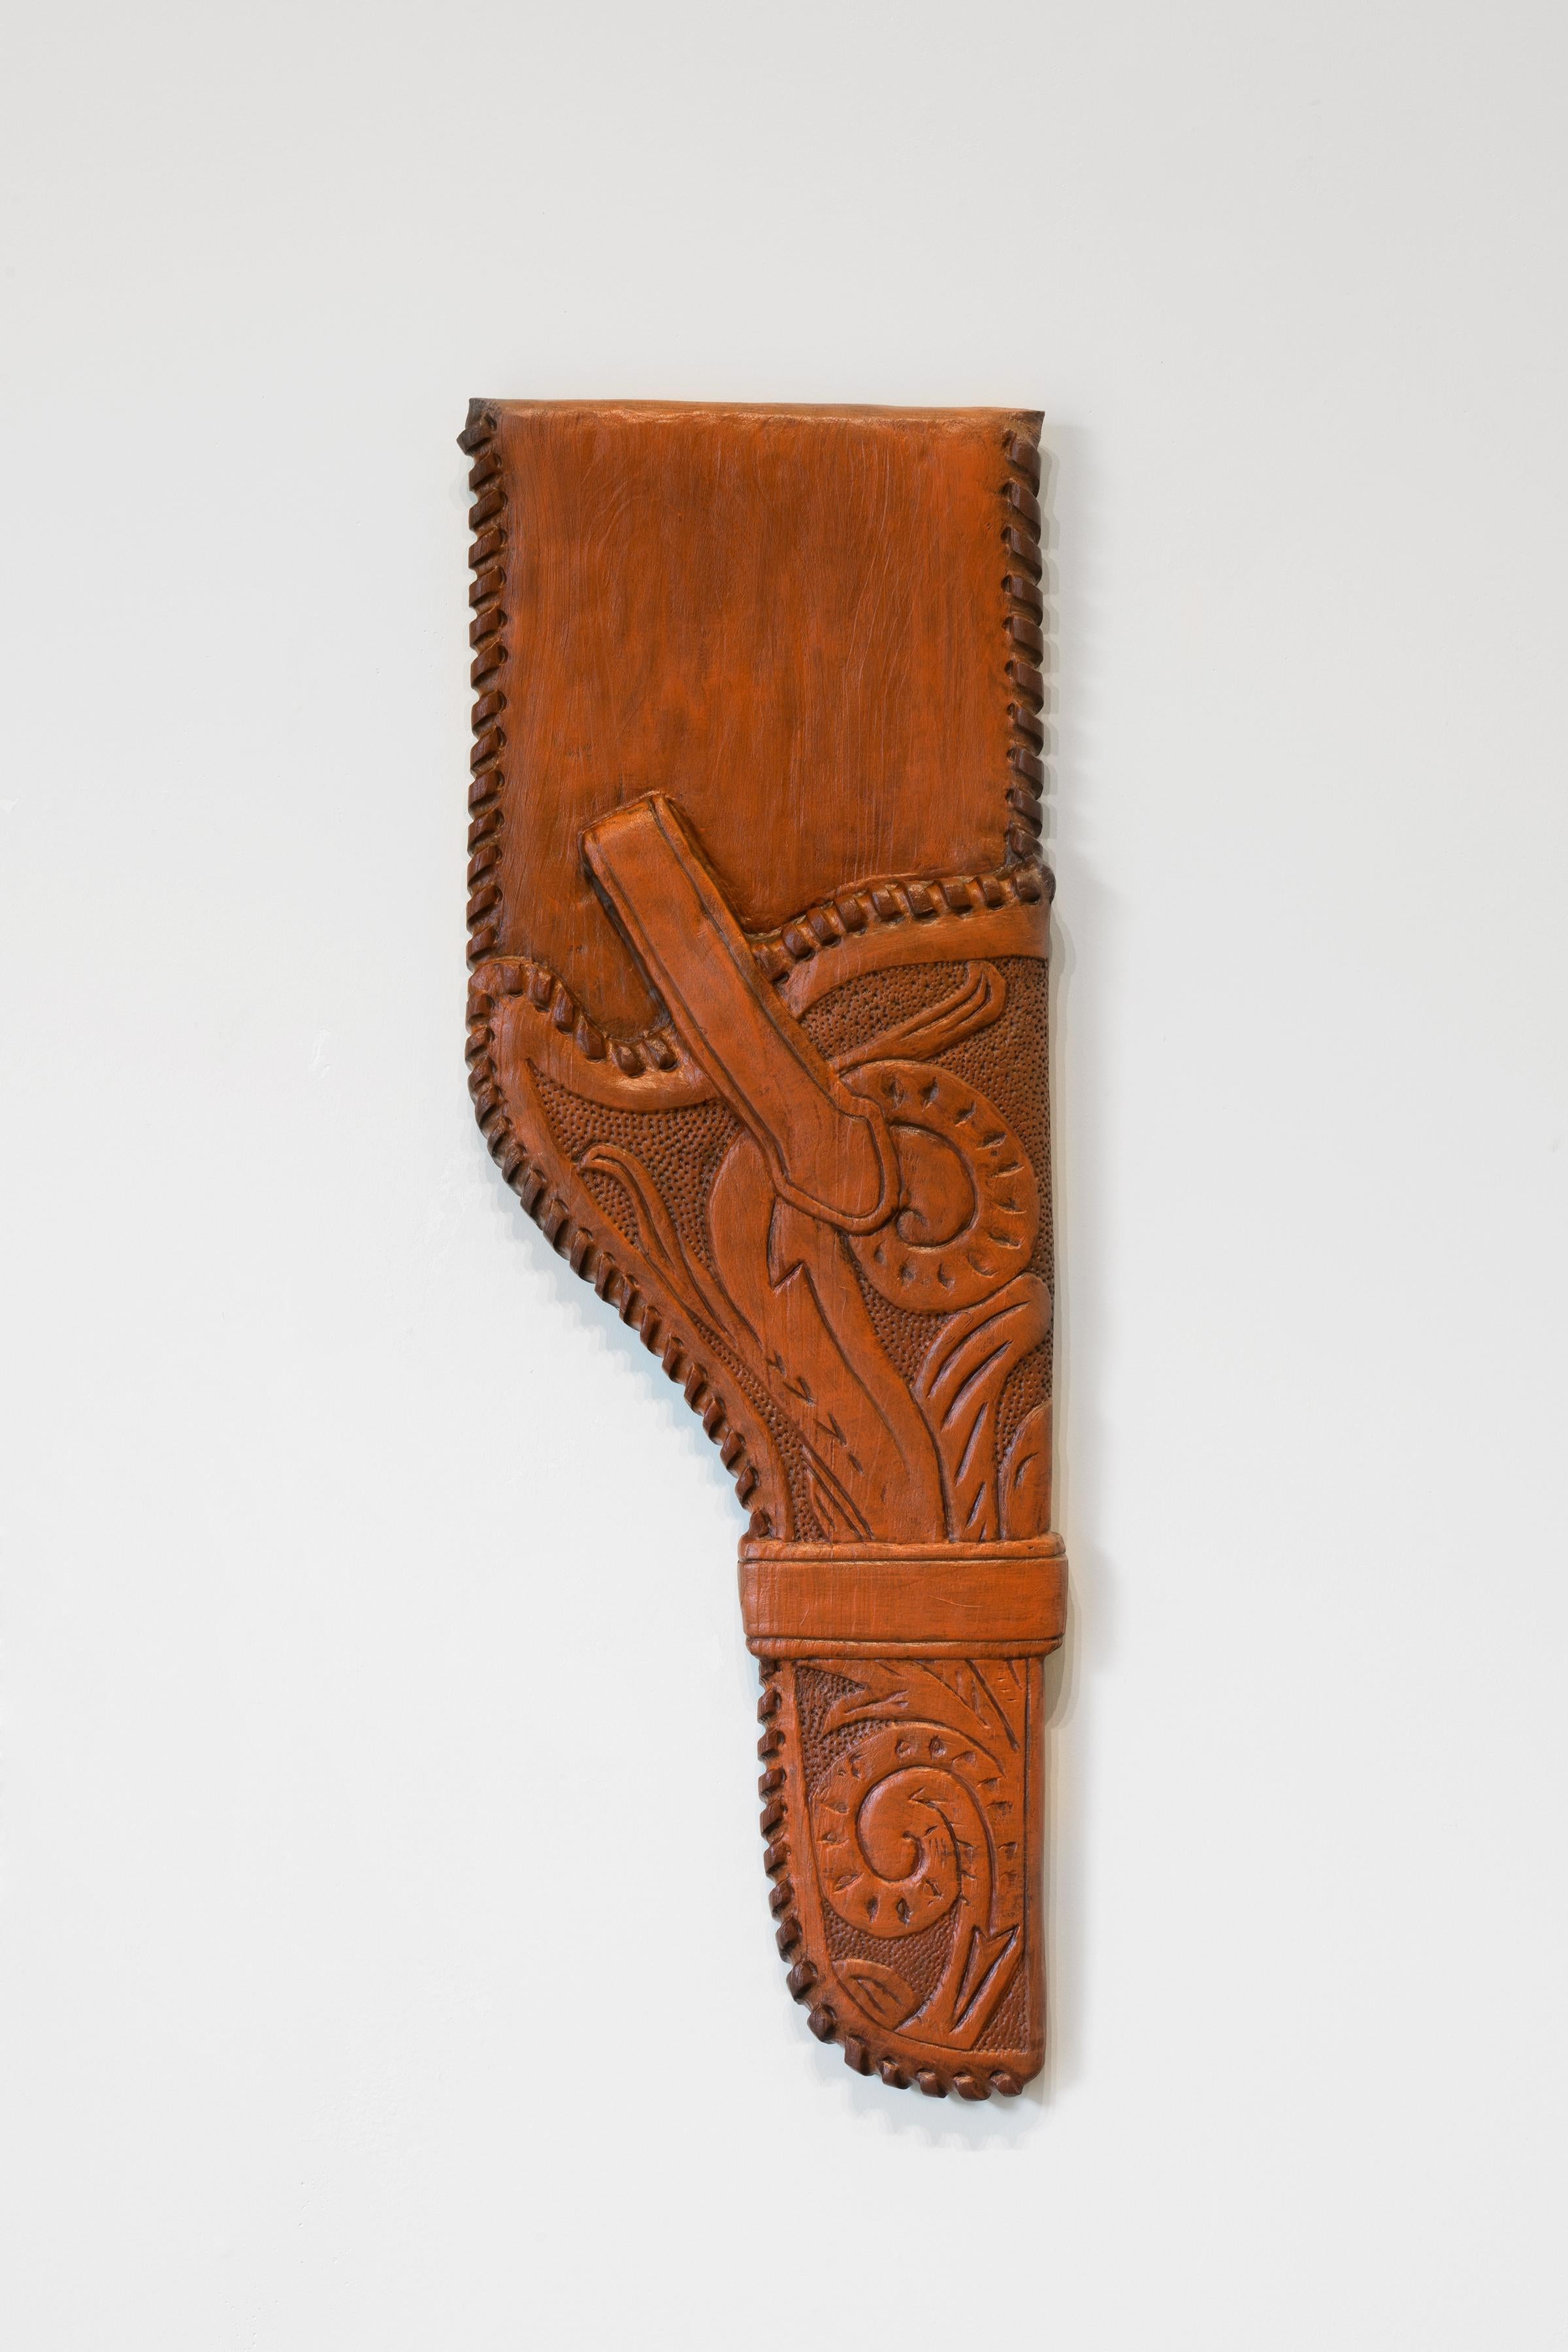 Ray Padron Figurative Sculpture - HOLSTER - Wood Sculpture of Western Style Gun Holster, Hyperrealistic Sculpture